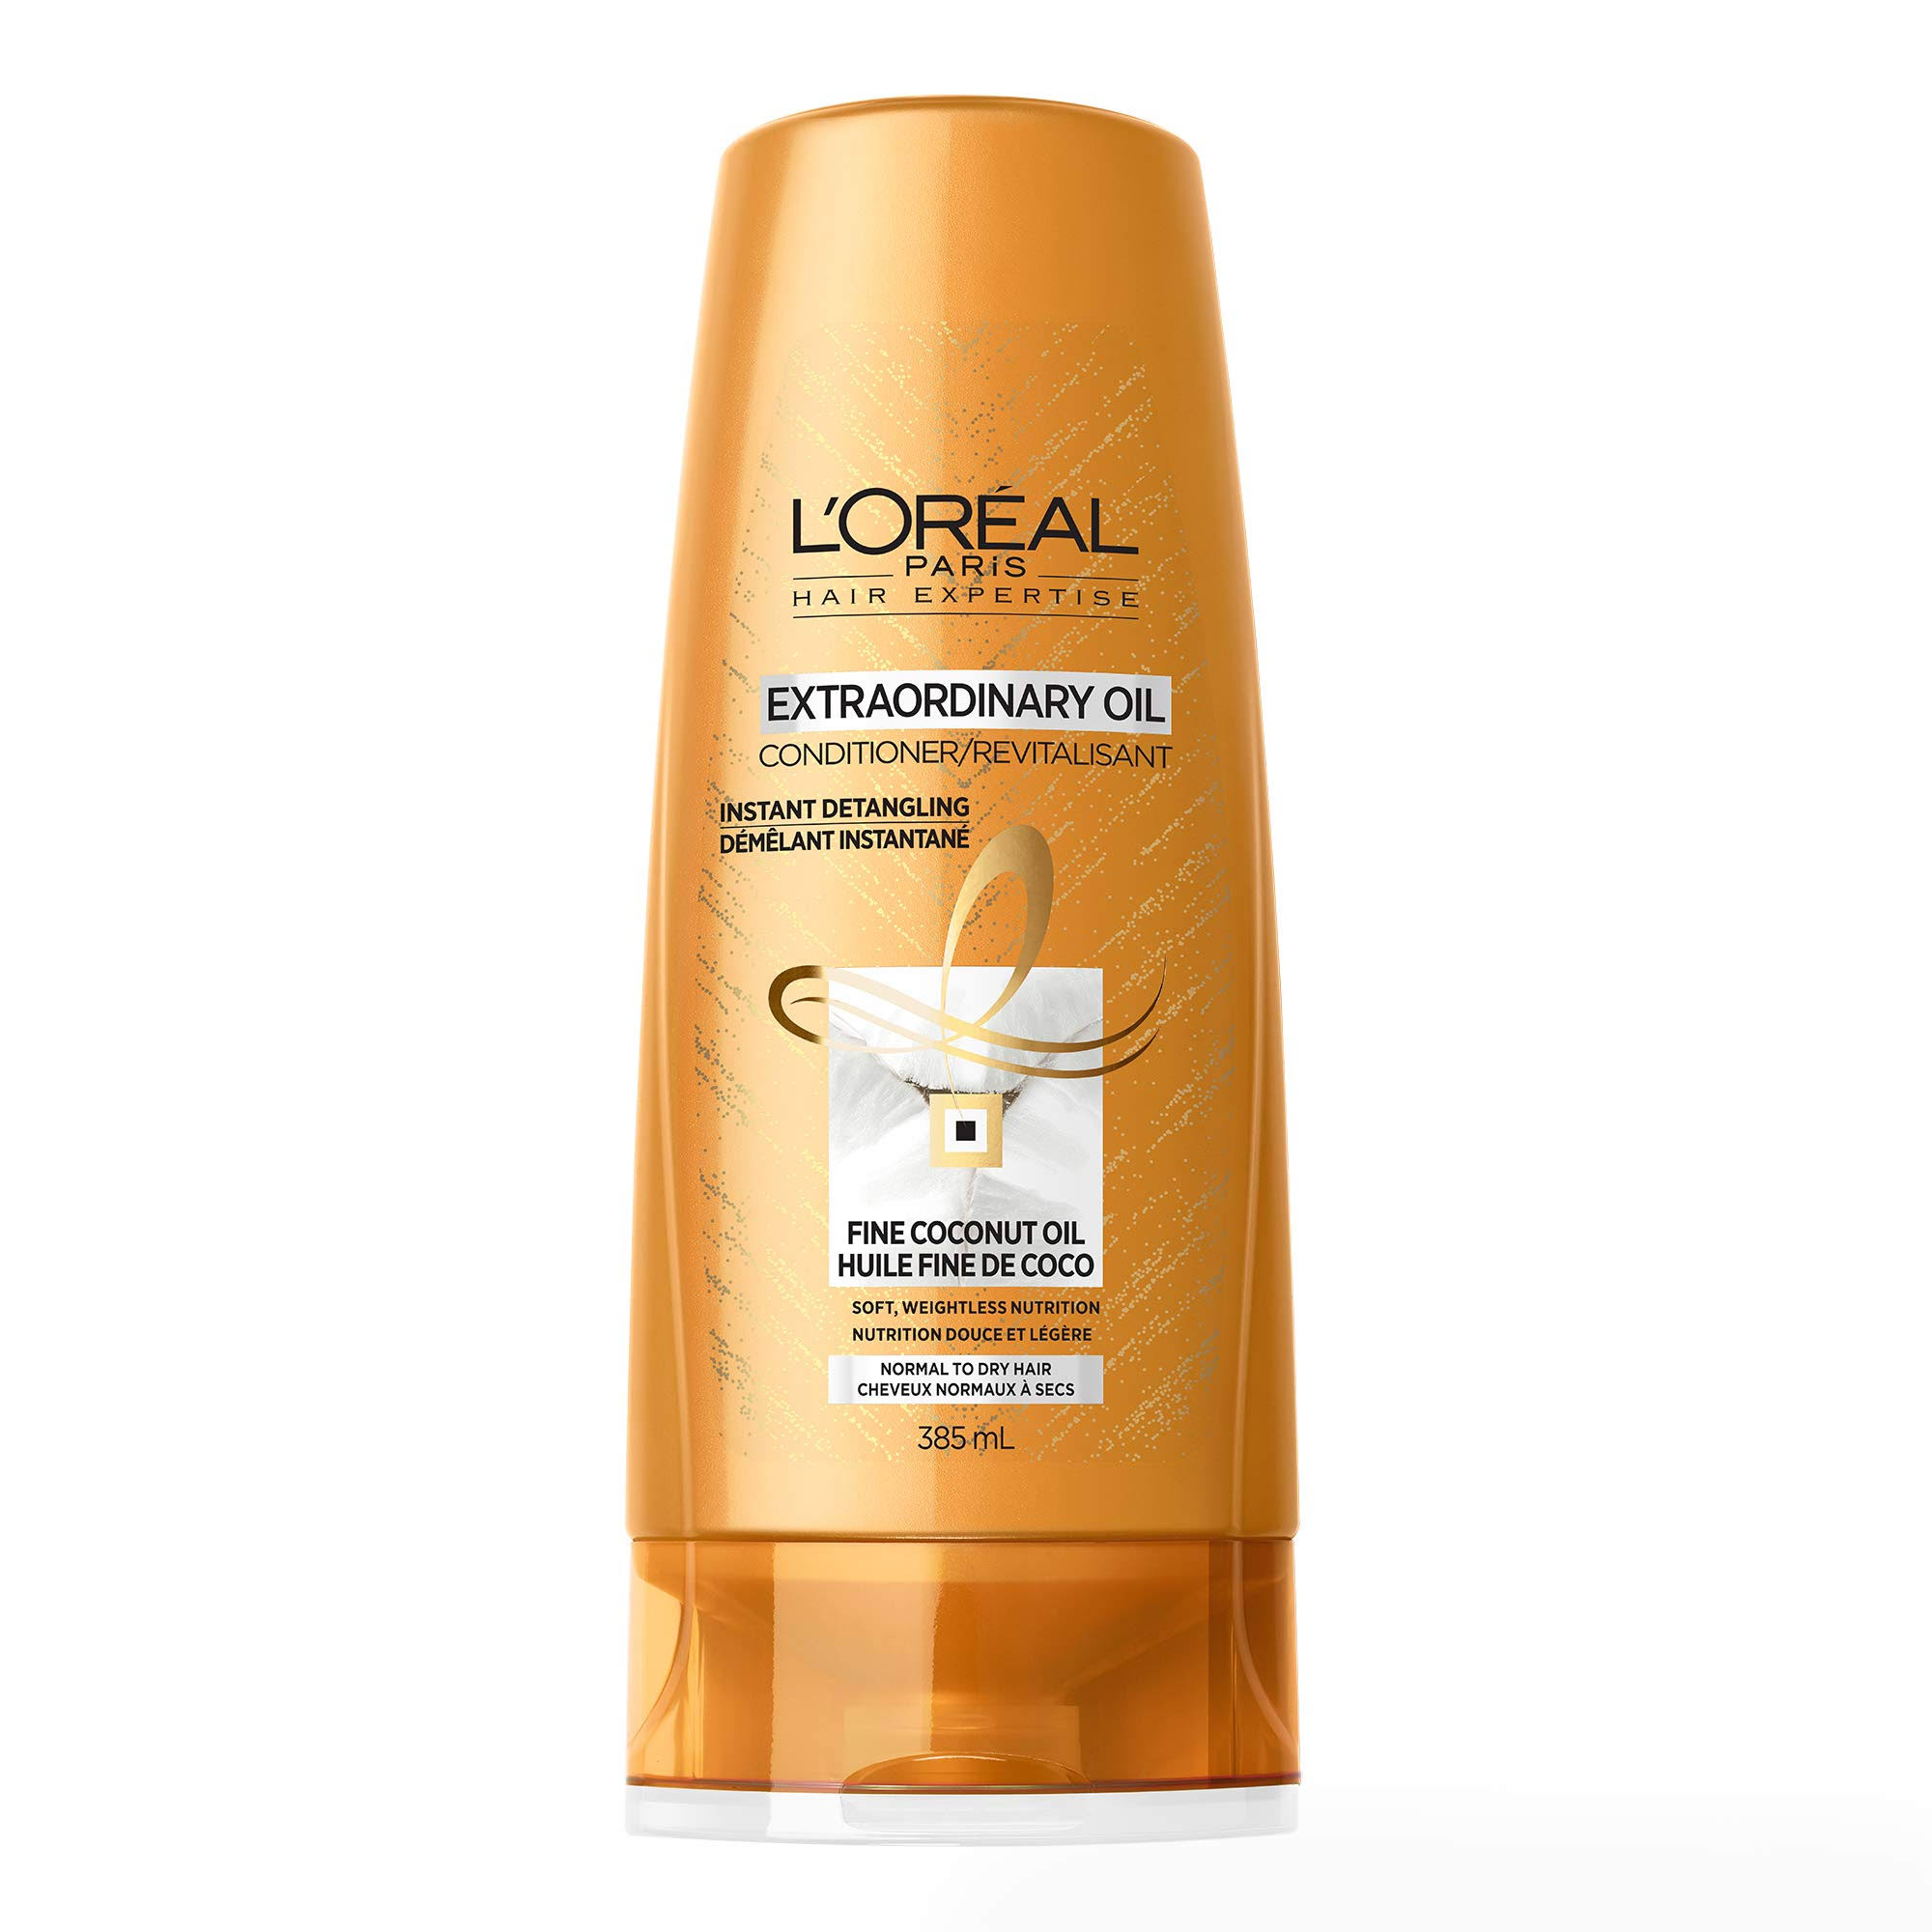 L'Oréal Hair Expertise Extraordinary Oil Conditioner - 385ml